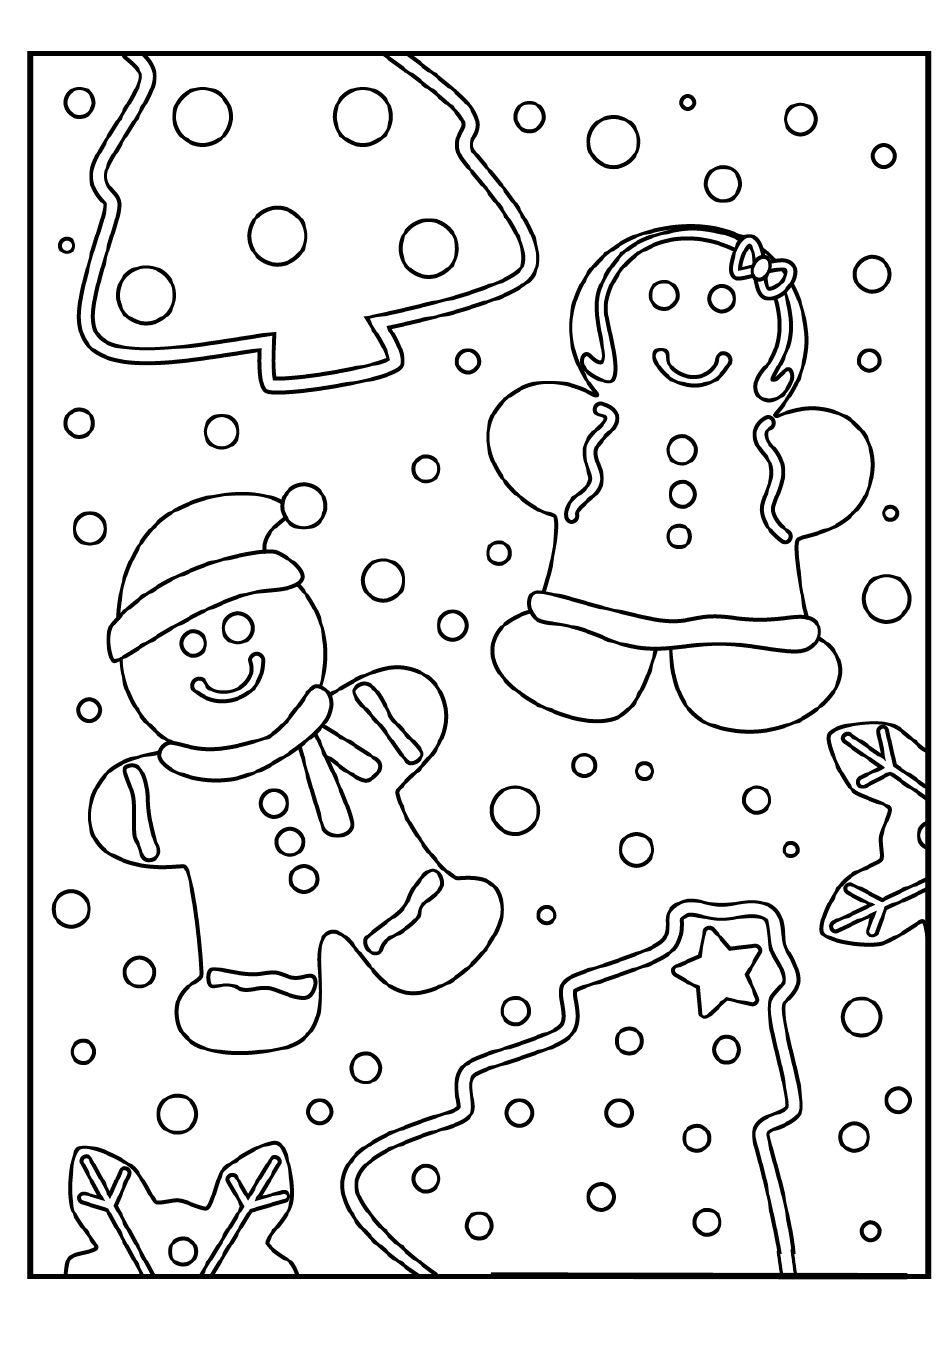 Gingerbread coloring pages featuring adorable boy and girl designs